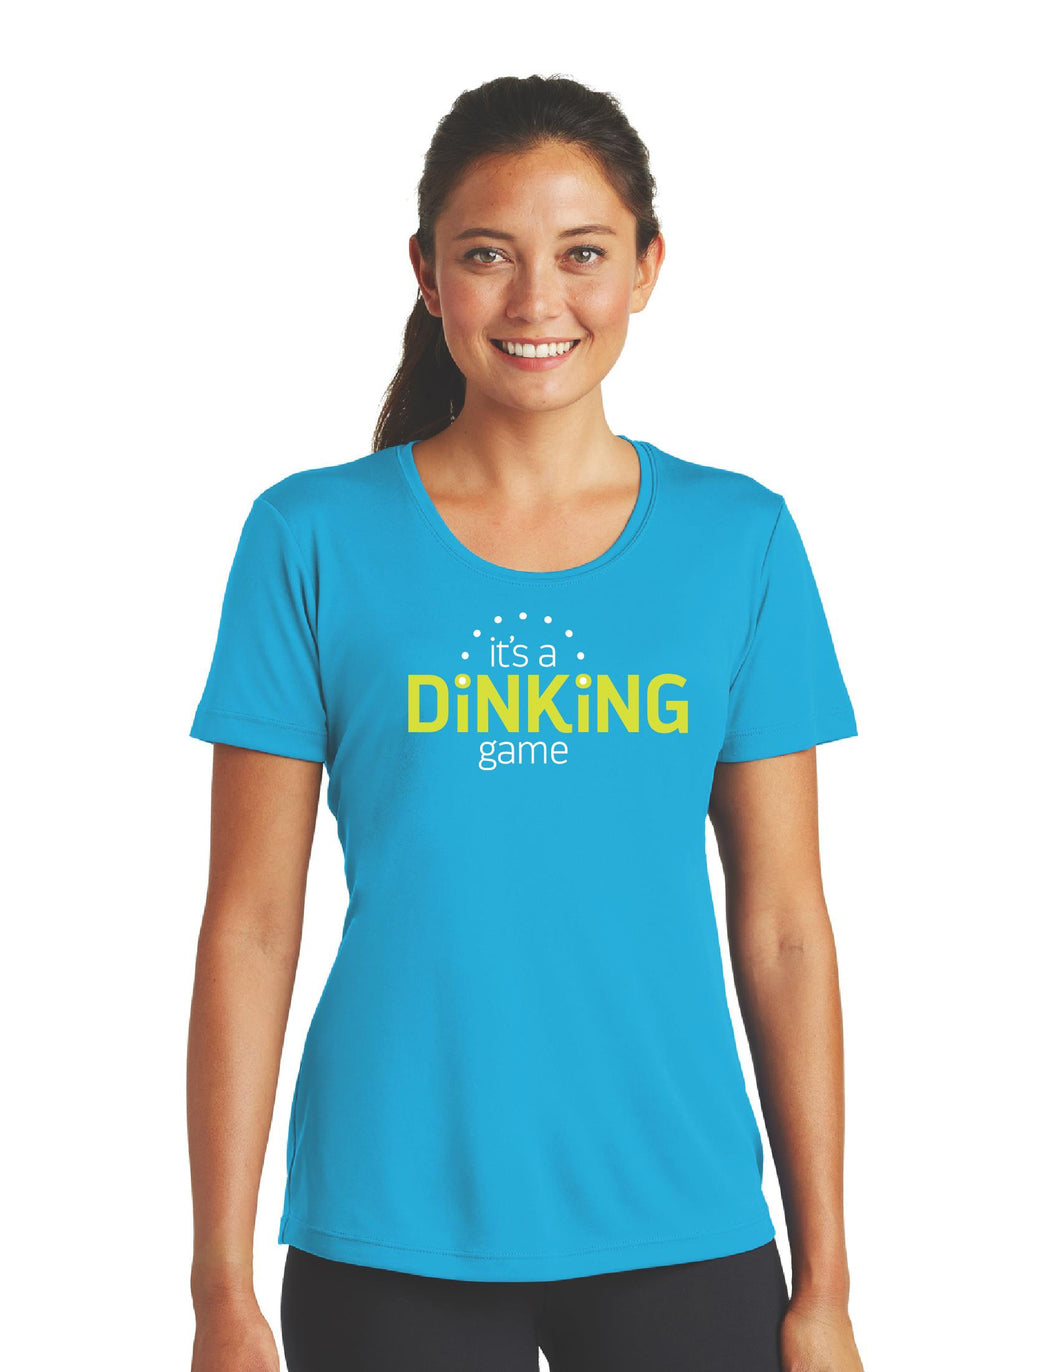 It's a Dinking Game - Womens Short Sleeve Performance Tee